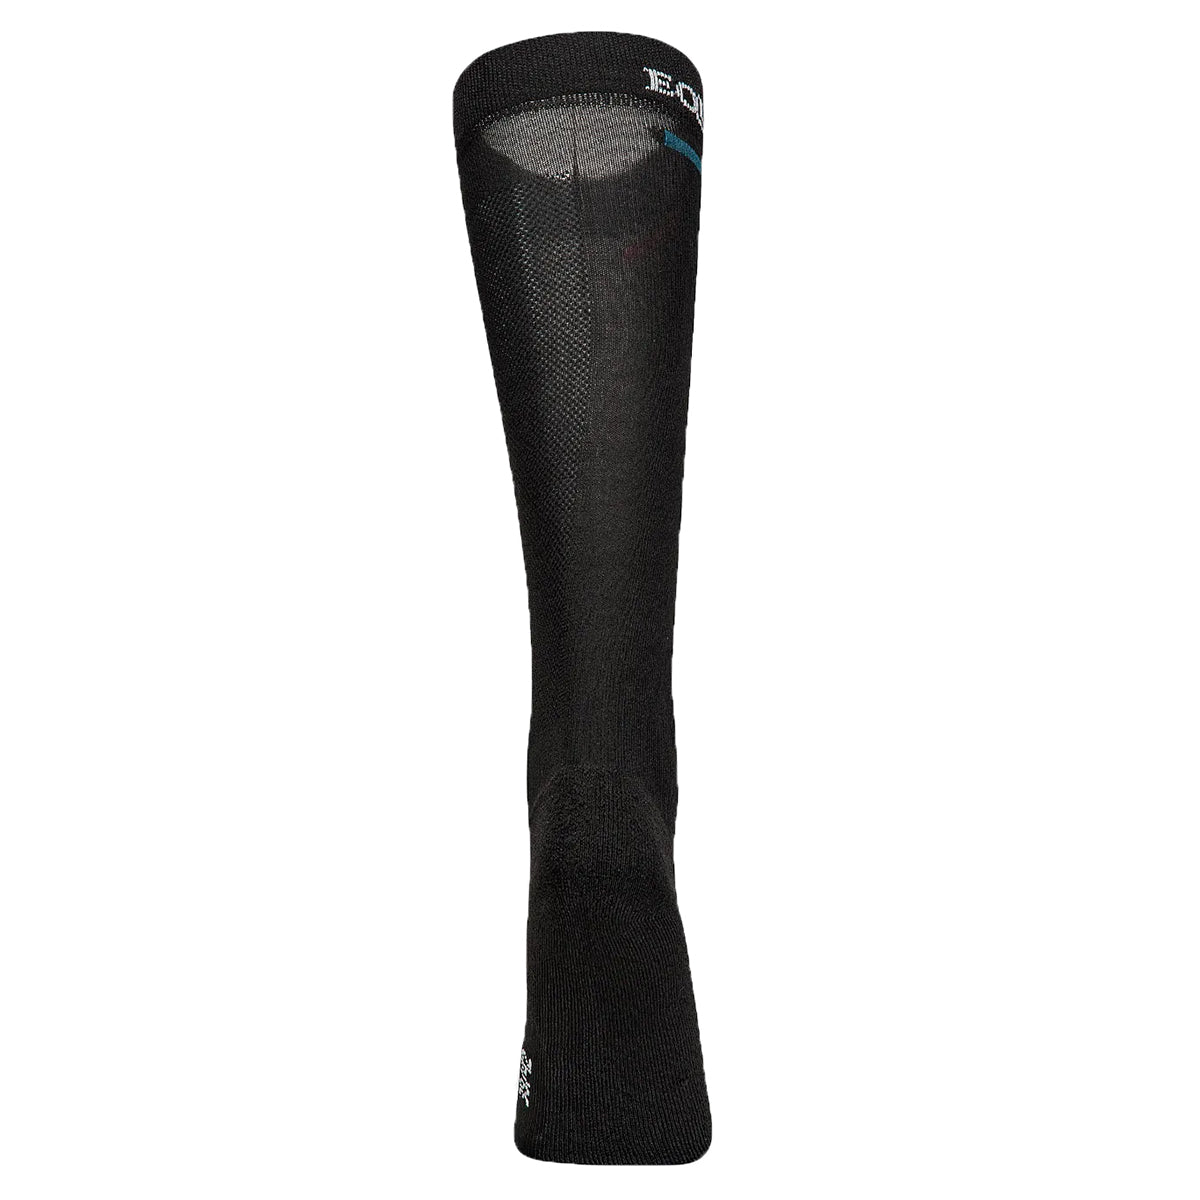 Equiline Silver Plus Light Sock